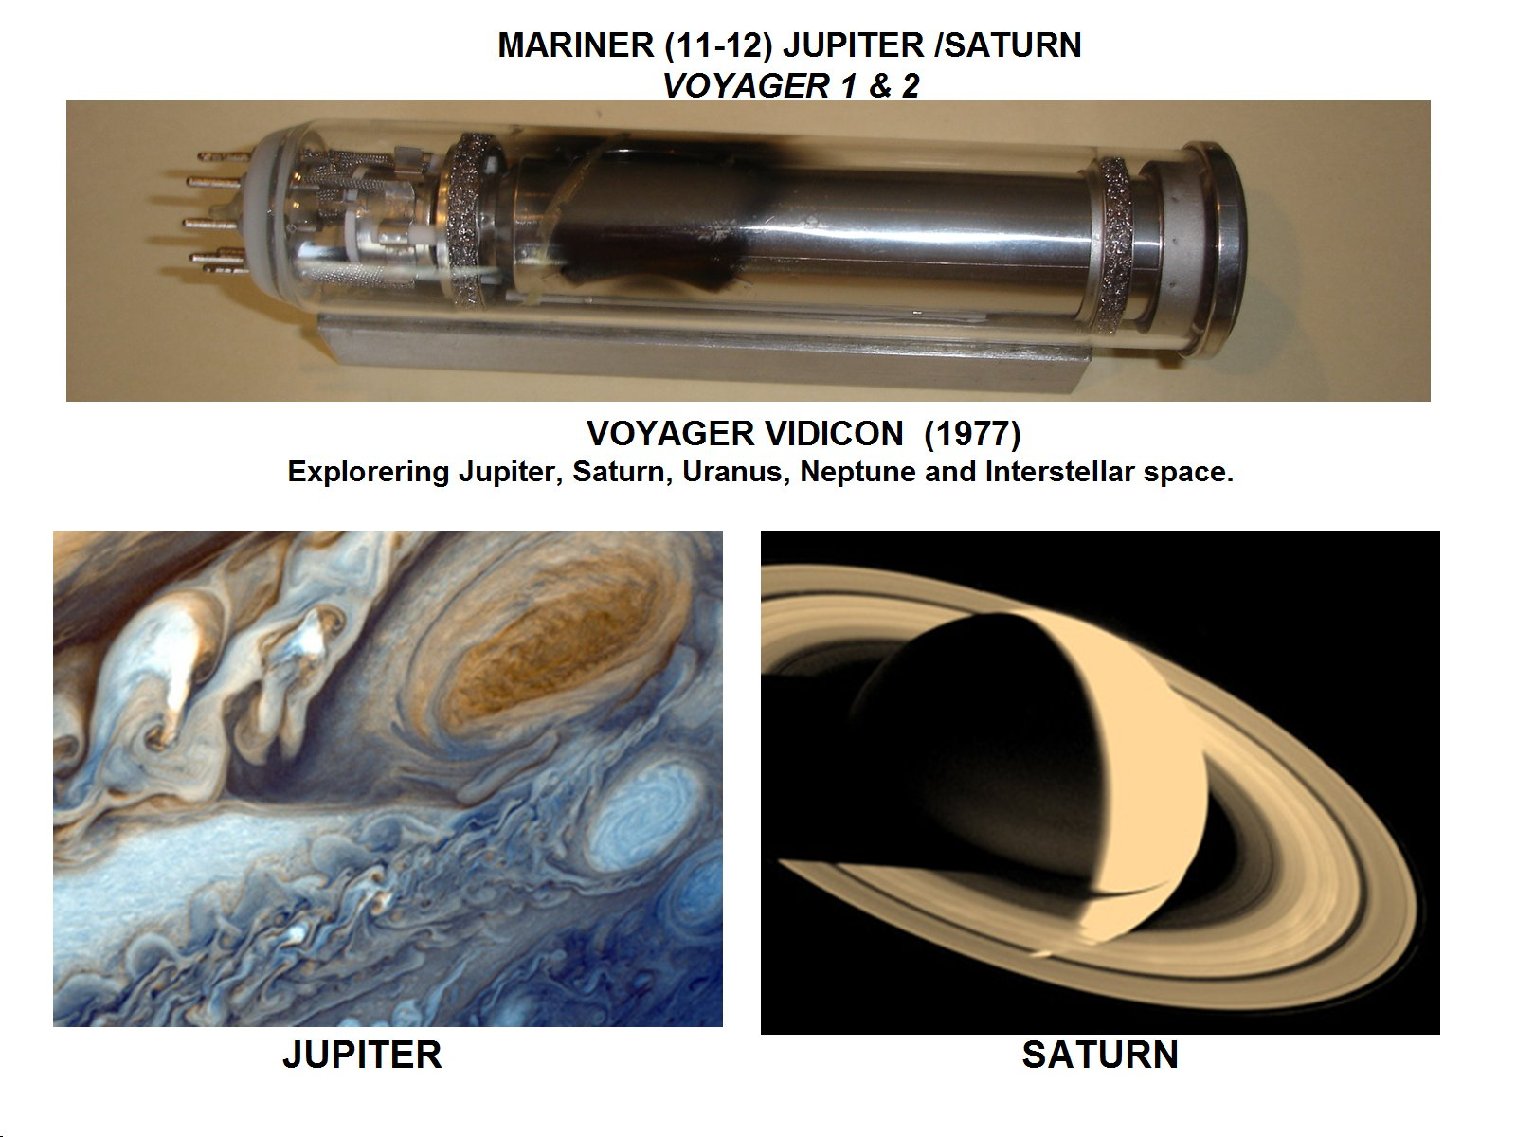 janesick" Voager space missions 1 & 2 ( Mariner 11 & 12)